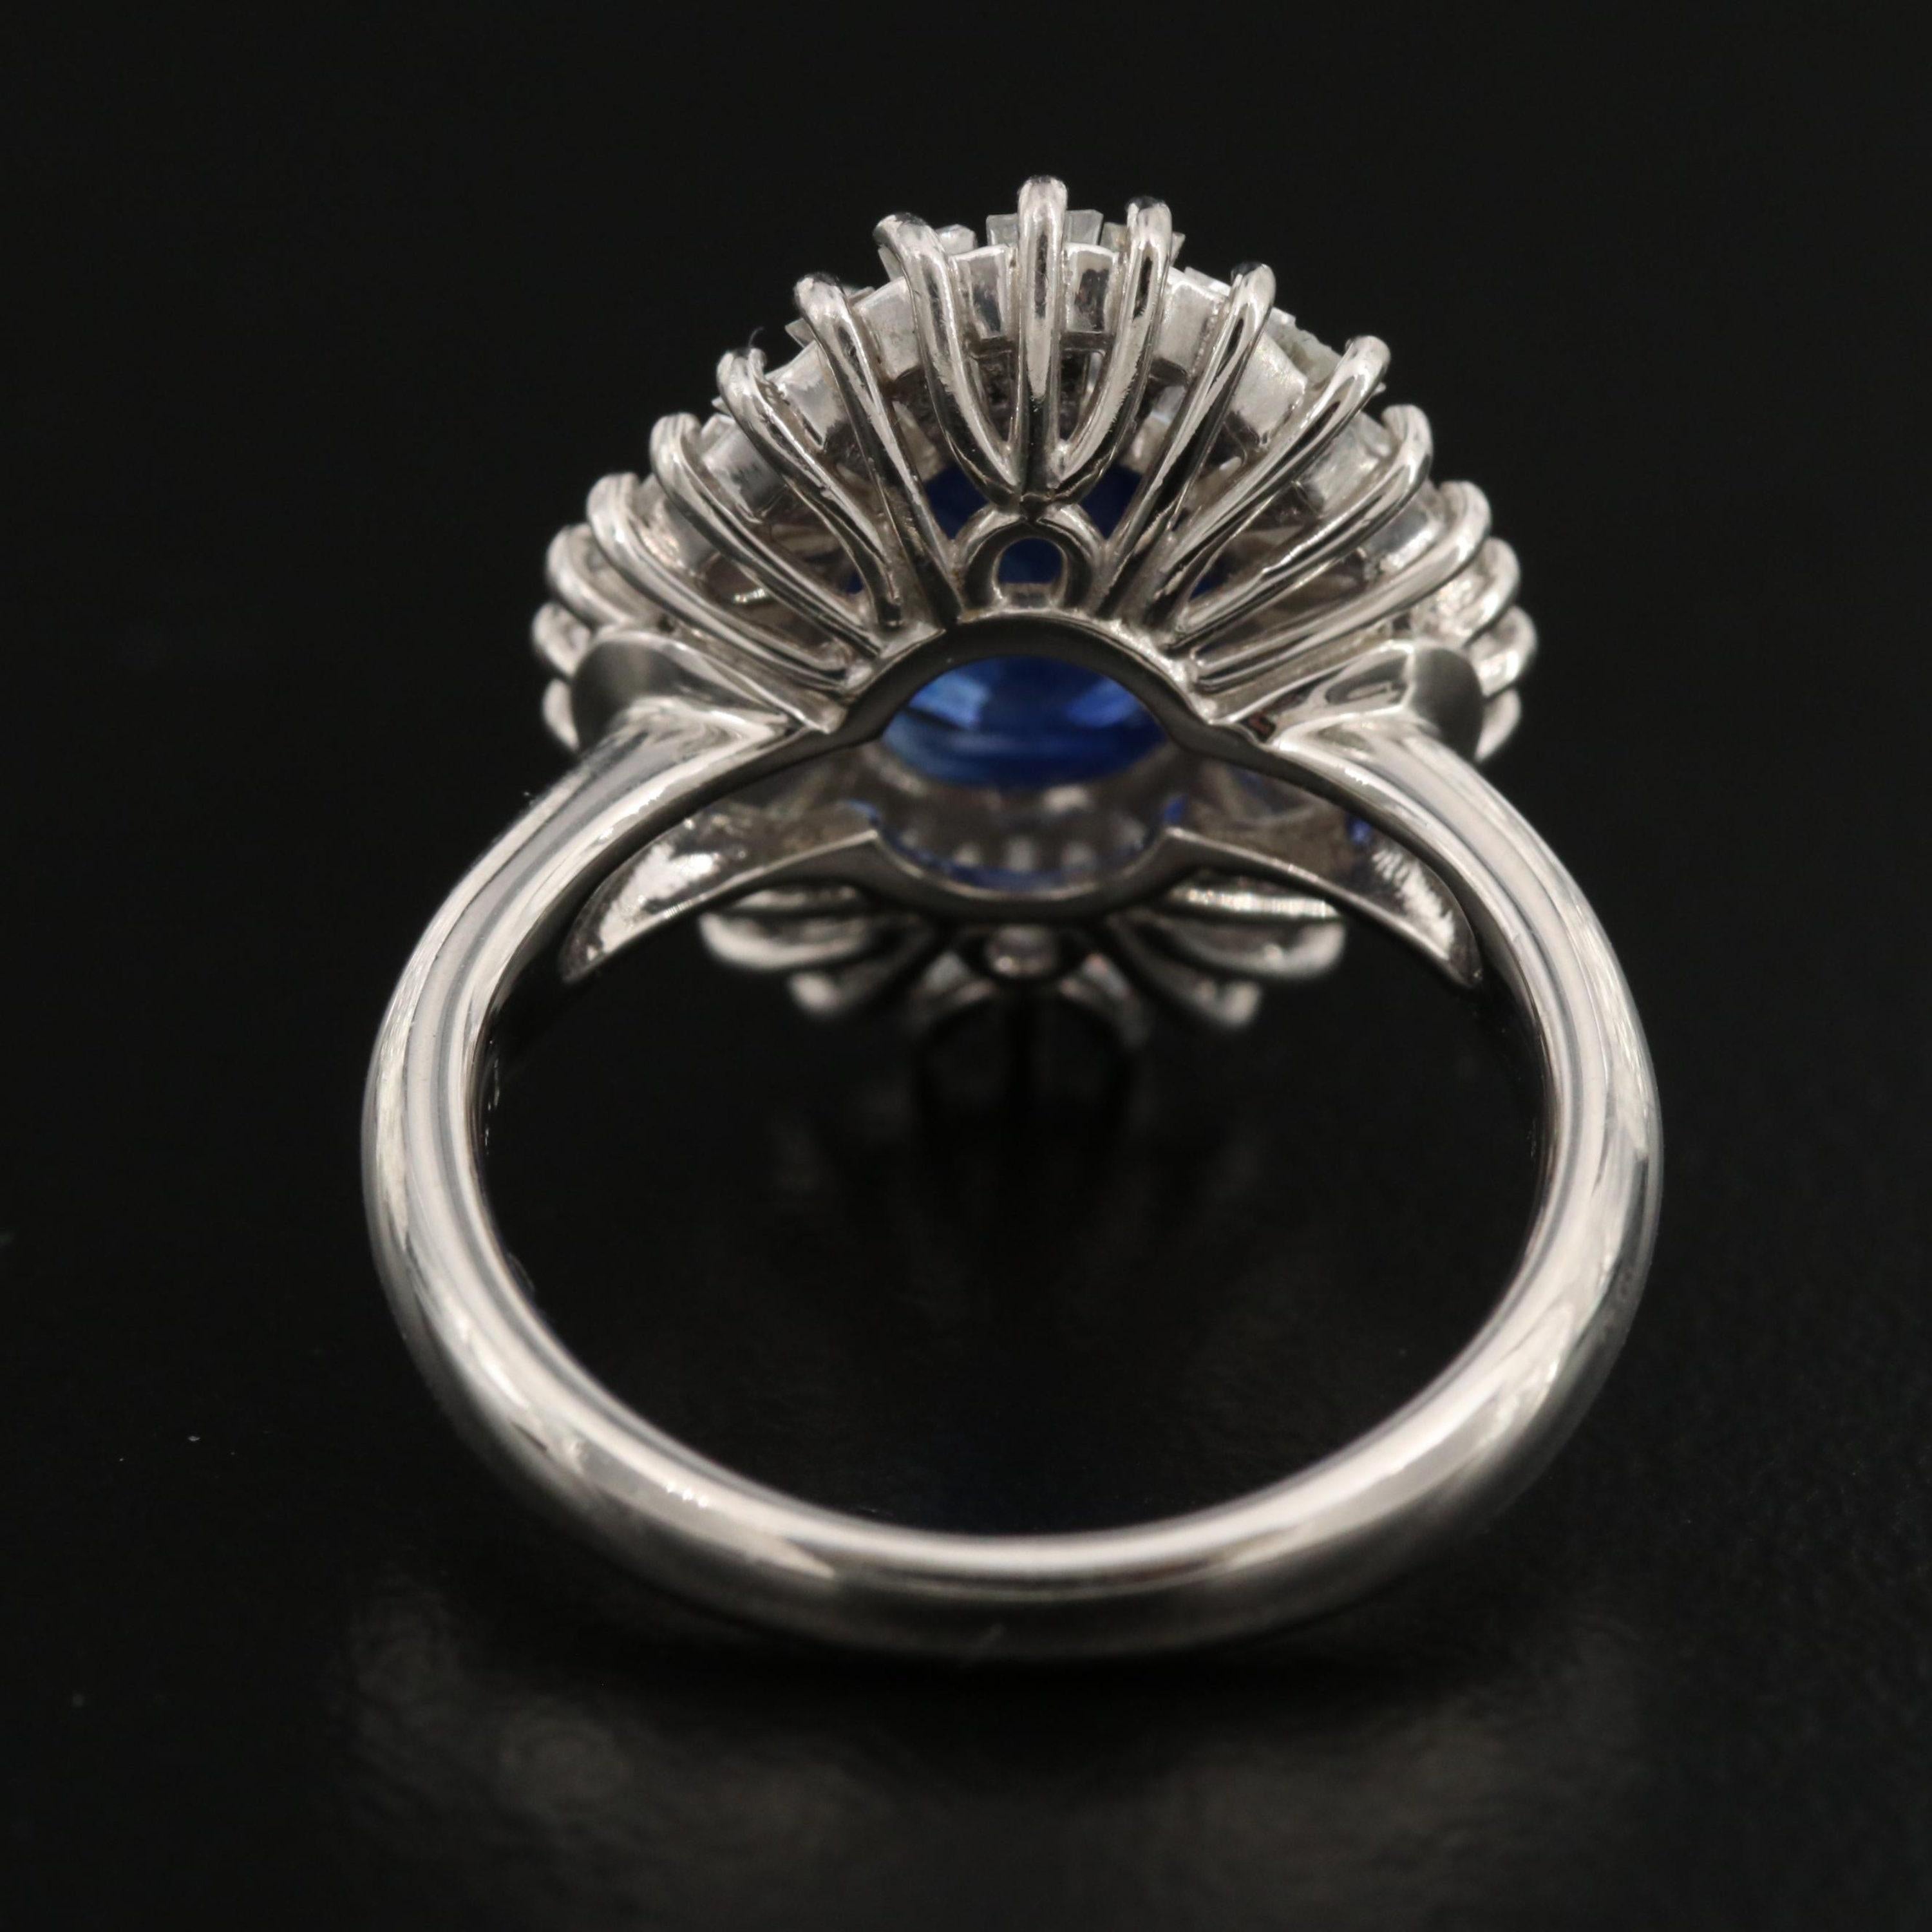 For Sale:  2 Carat Vintage Sapphire Engagement Ring, Halo Sapphire Diamond Cocktail Ring 3